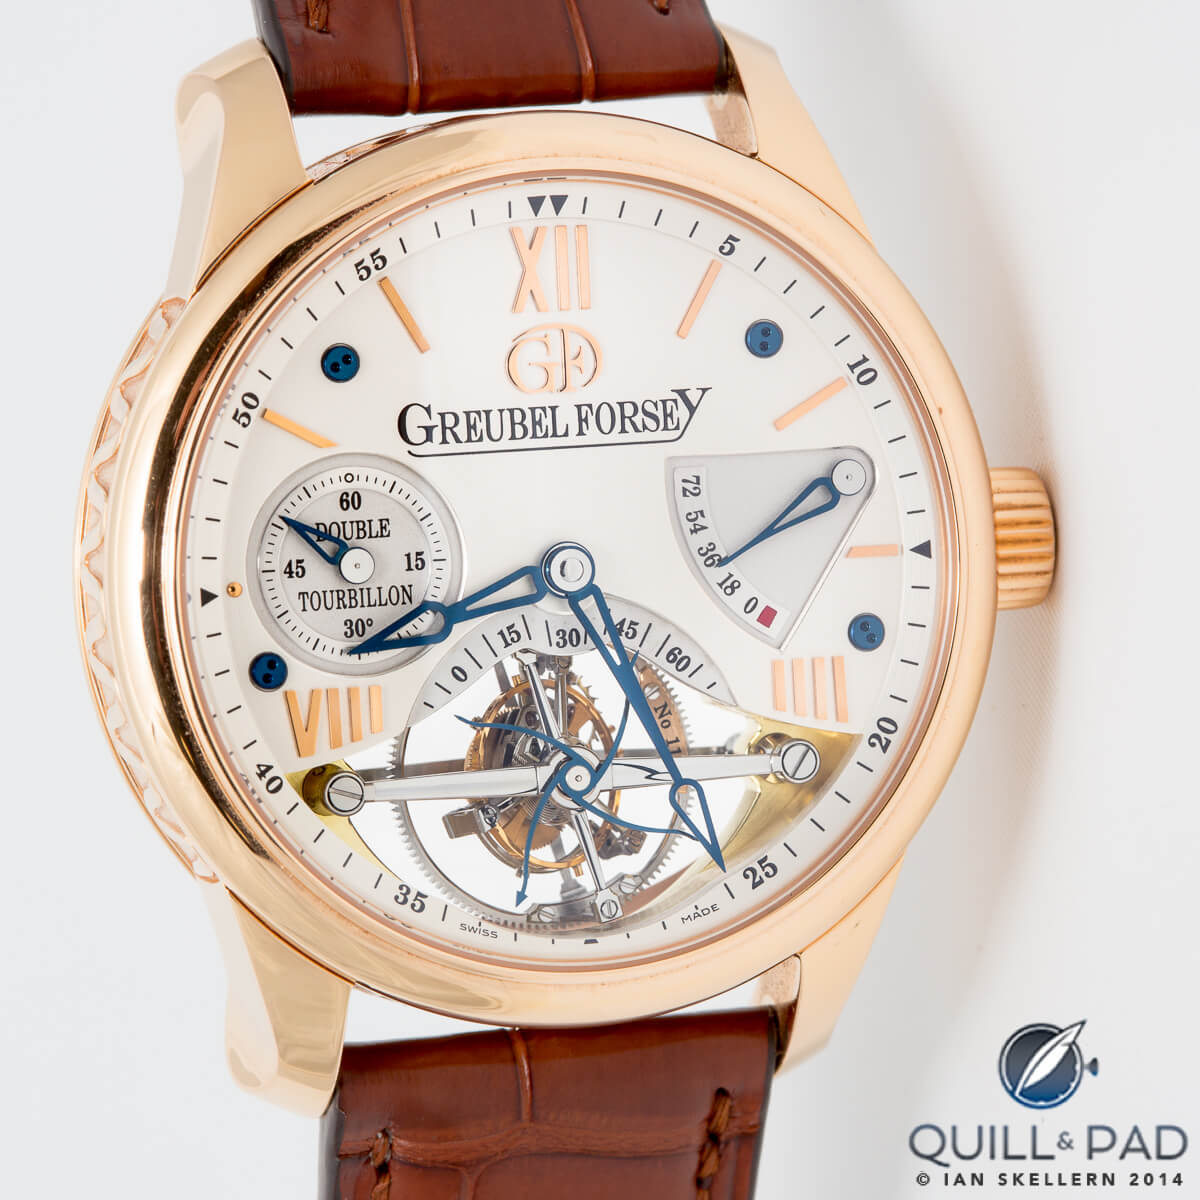 The timepiece that started it all for Greubel Forsey: The Double Tourbillon 30°